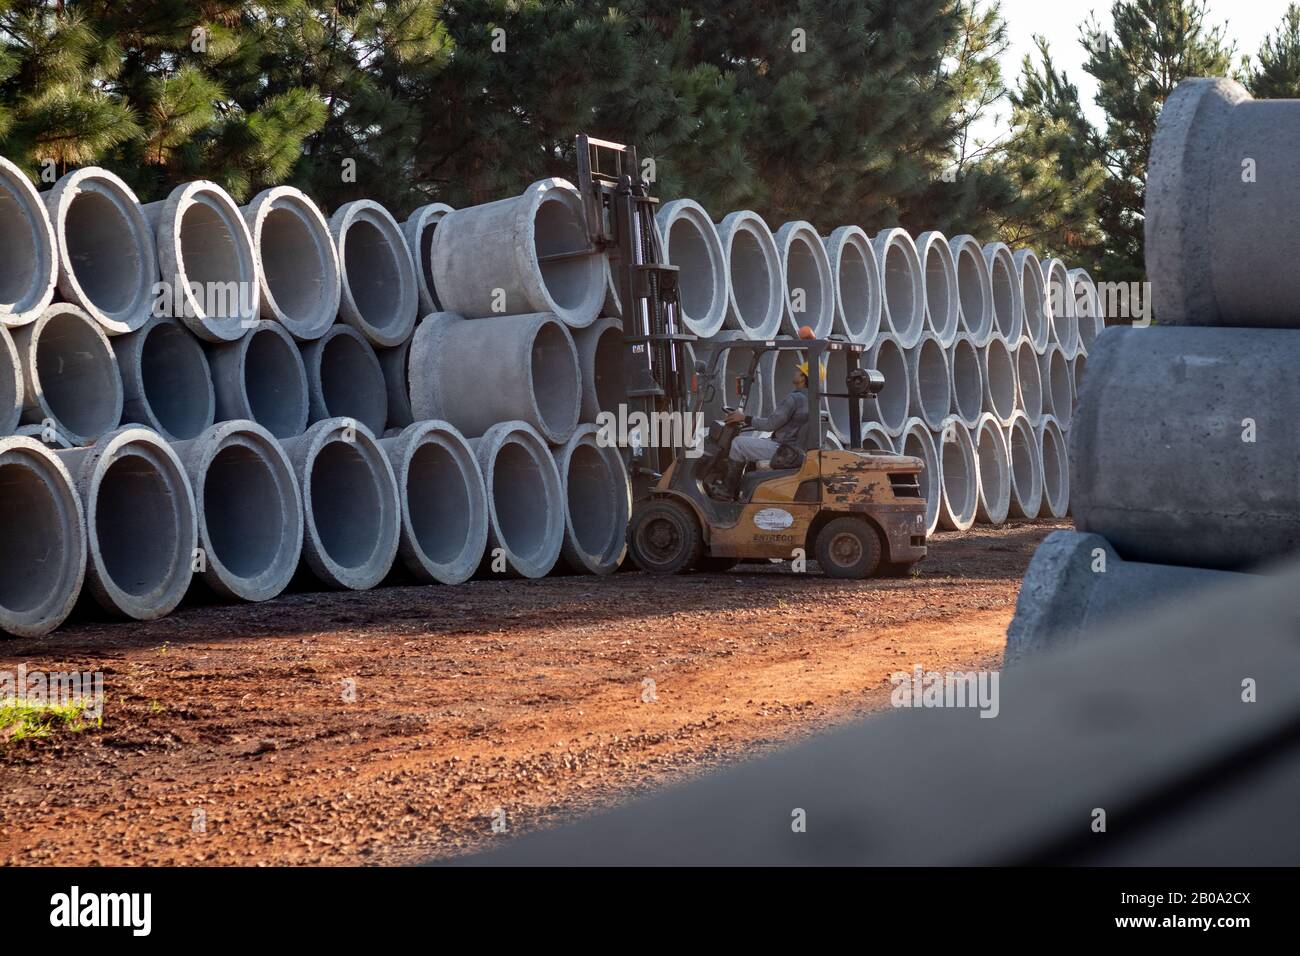 A forklift carrying sewer pipes Stock Photo